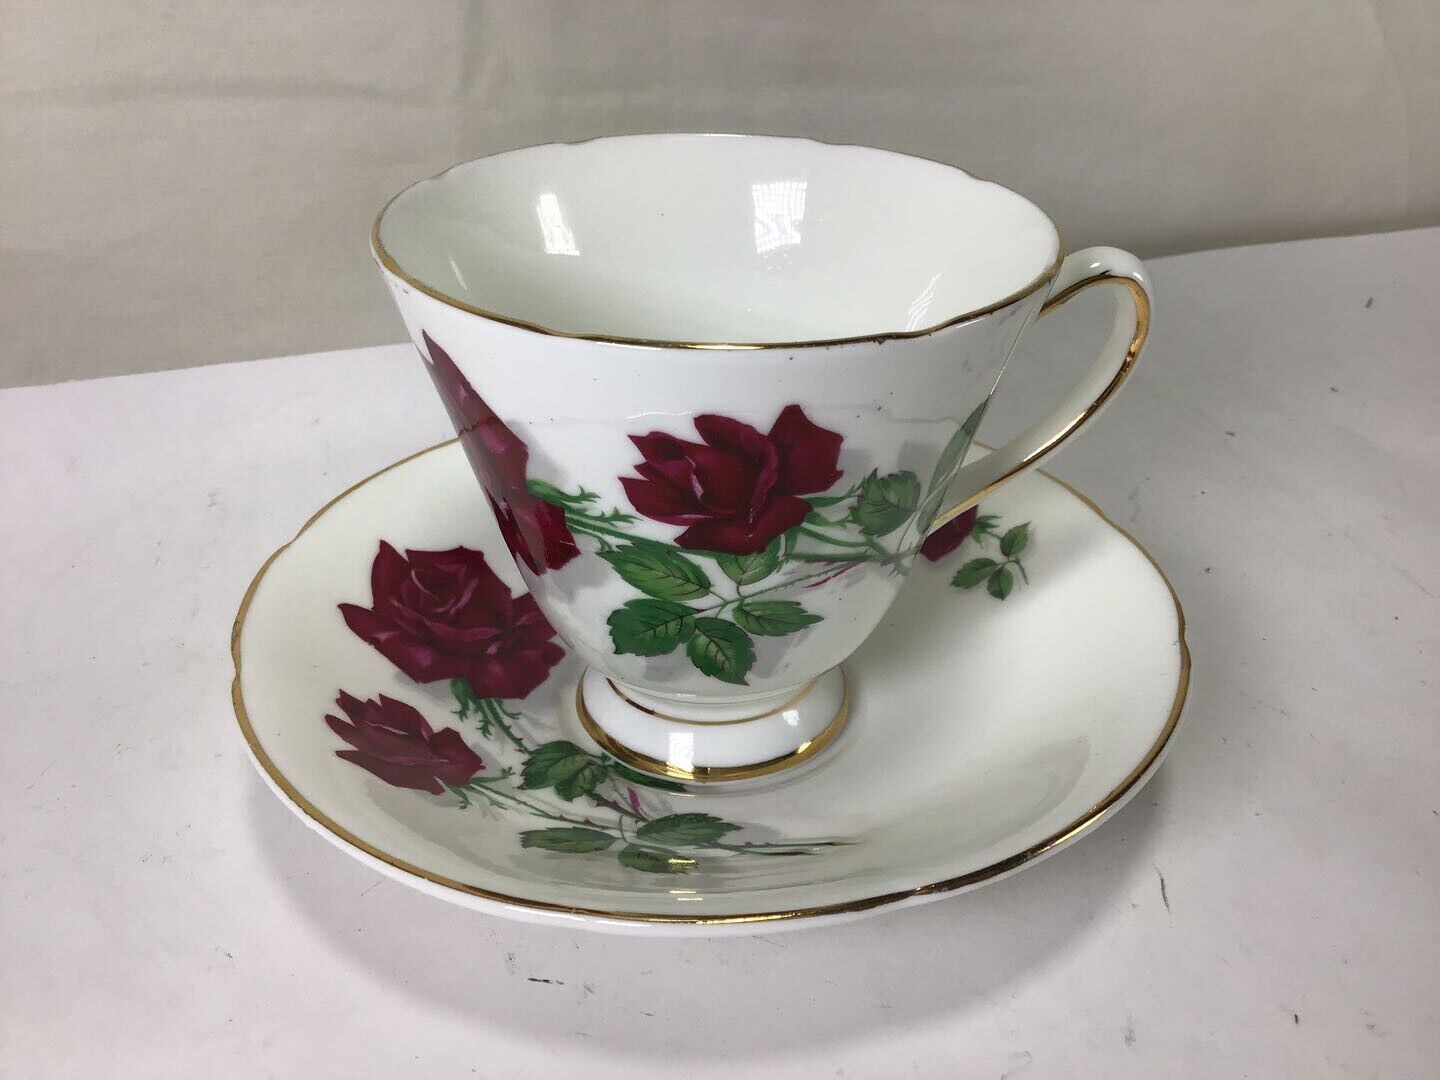 LL26 Old Royal Bone China Tea Cup and Saucer - Set 1 Cup & Saucer for Drink Ware